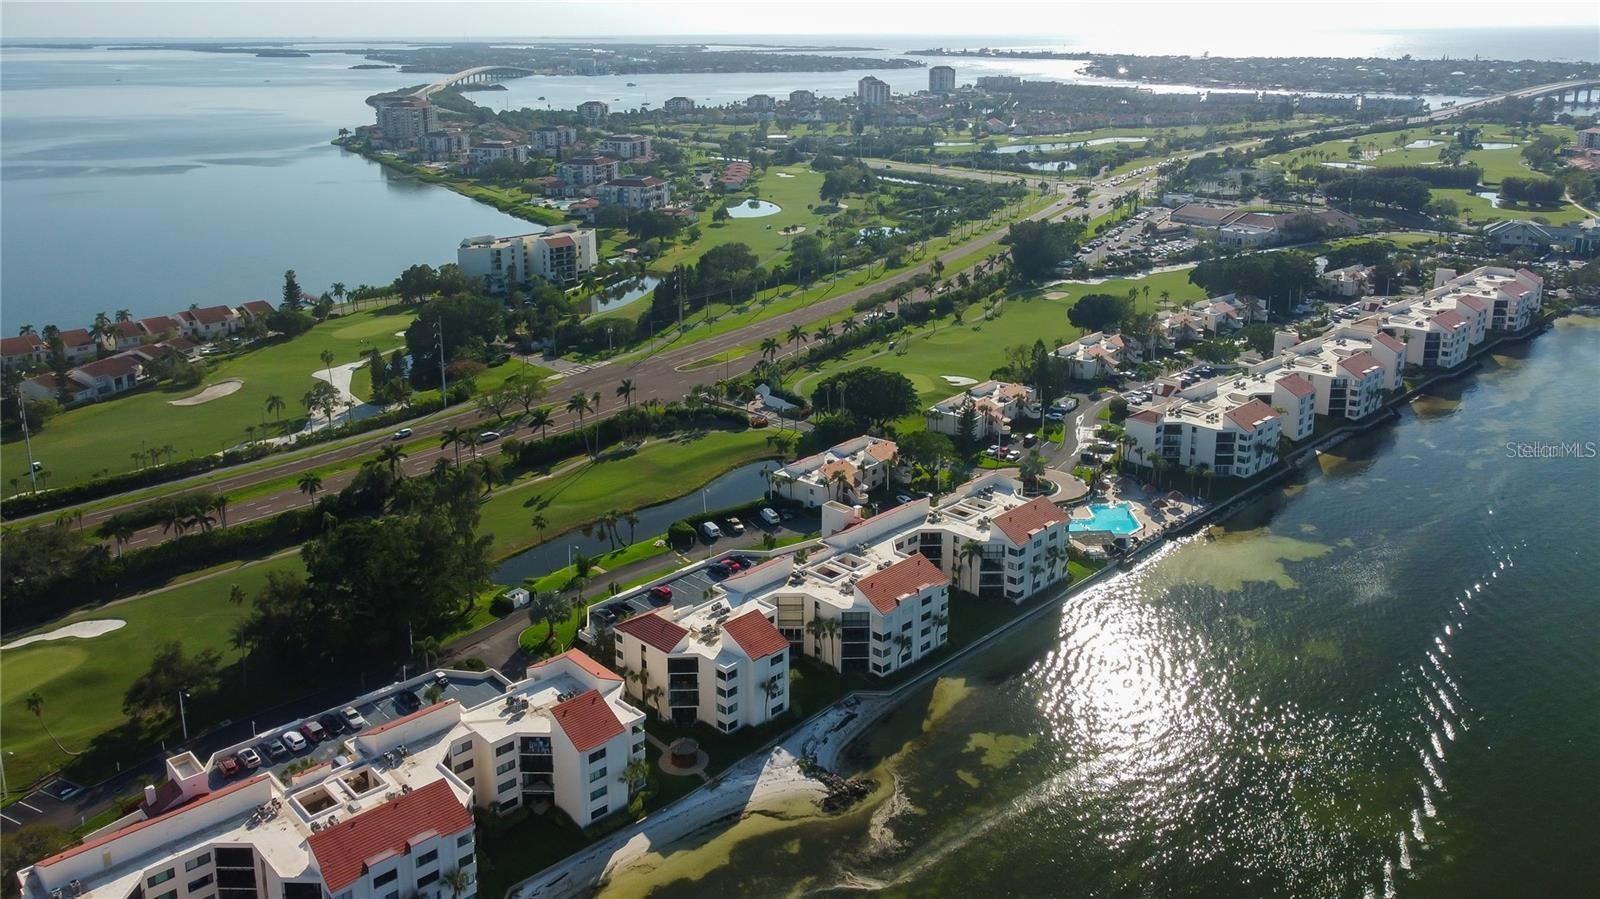 Your home will be right on the 18 hole golf course and surrounded by Boca Ciega Bay